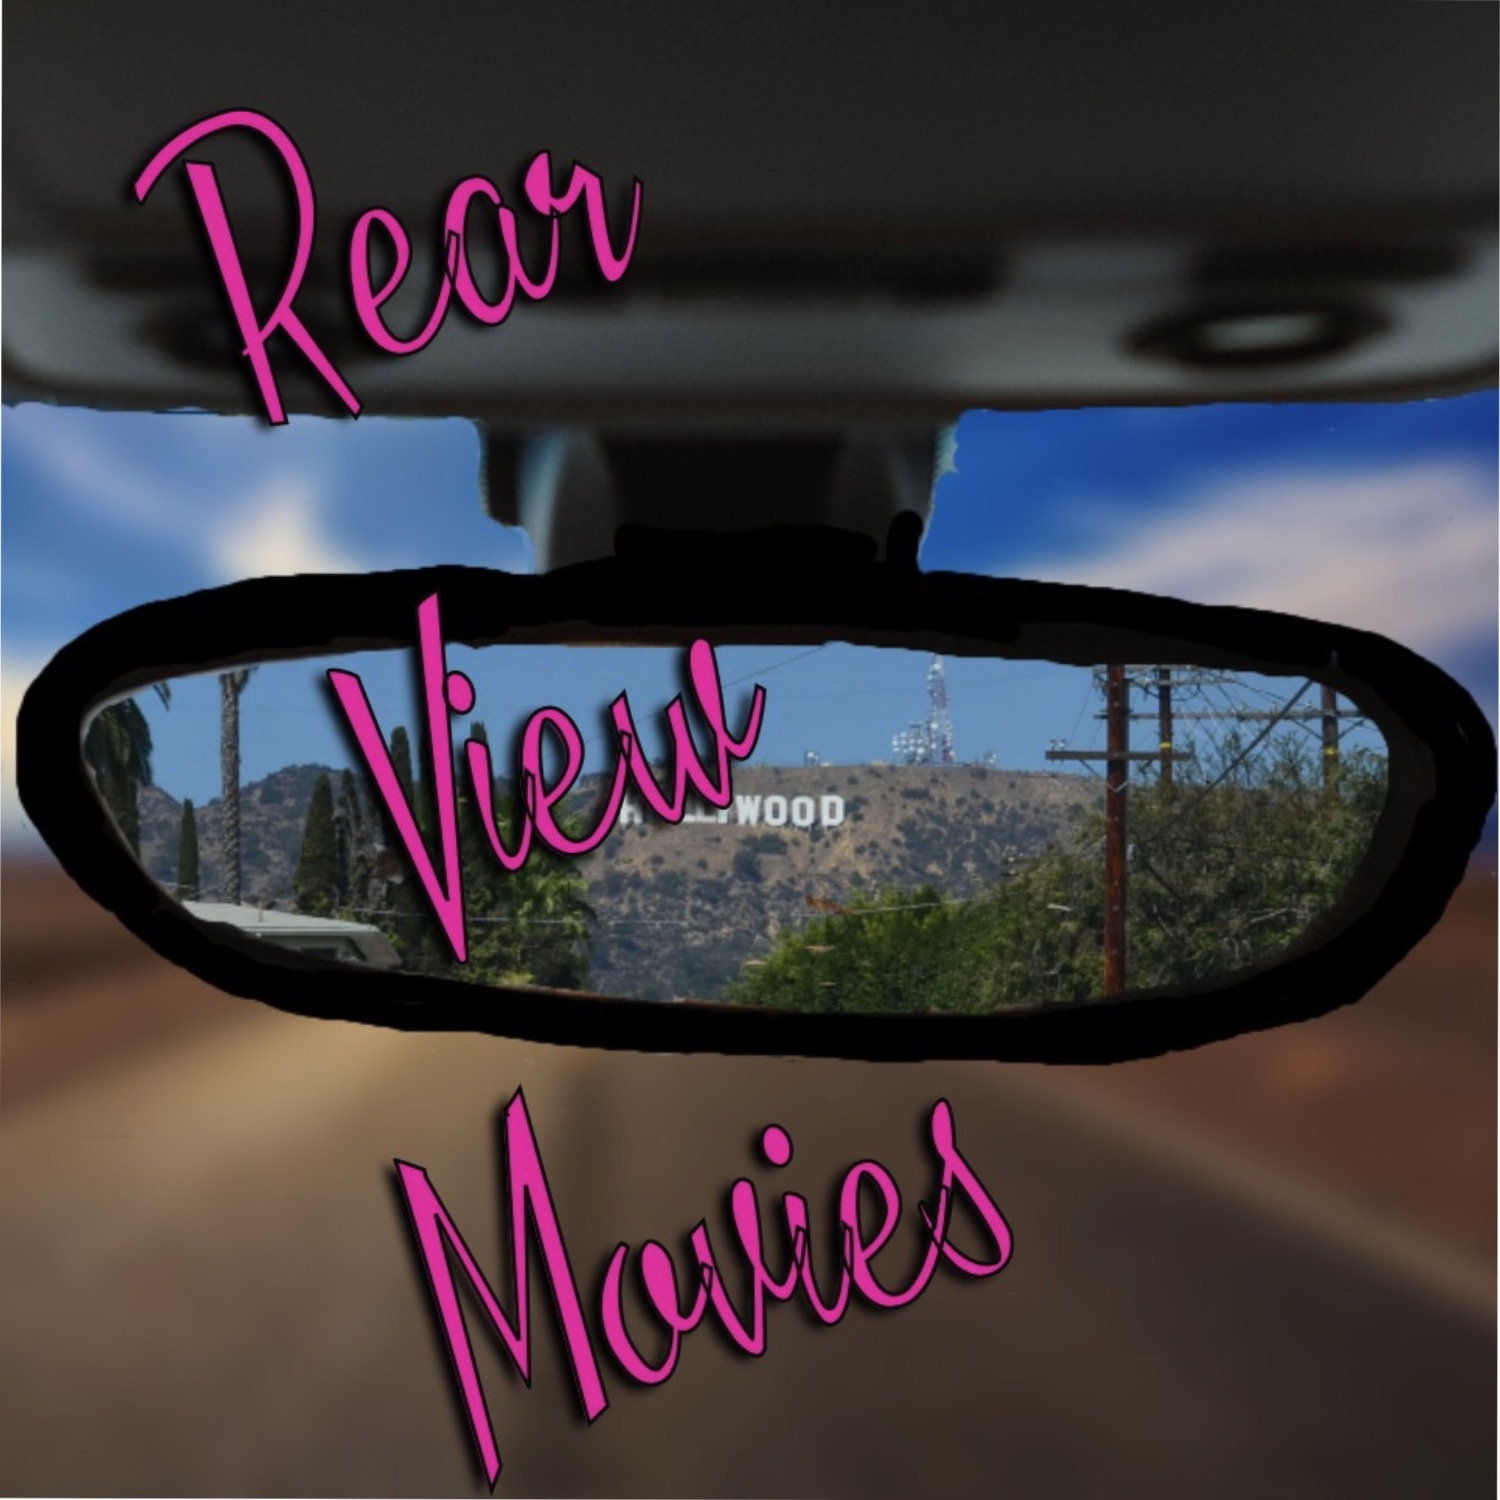 Show artwork for Rear View Movies